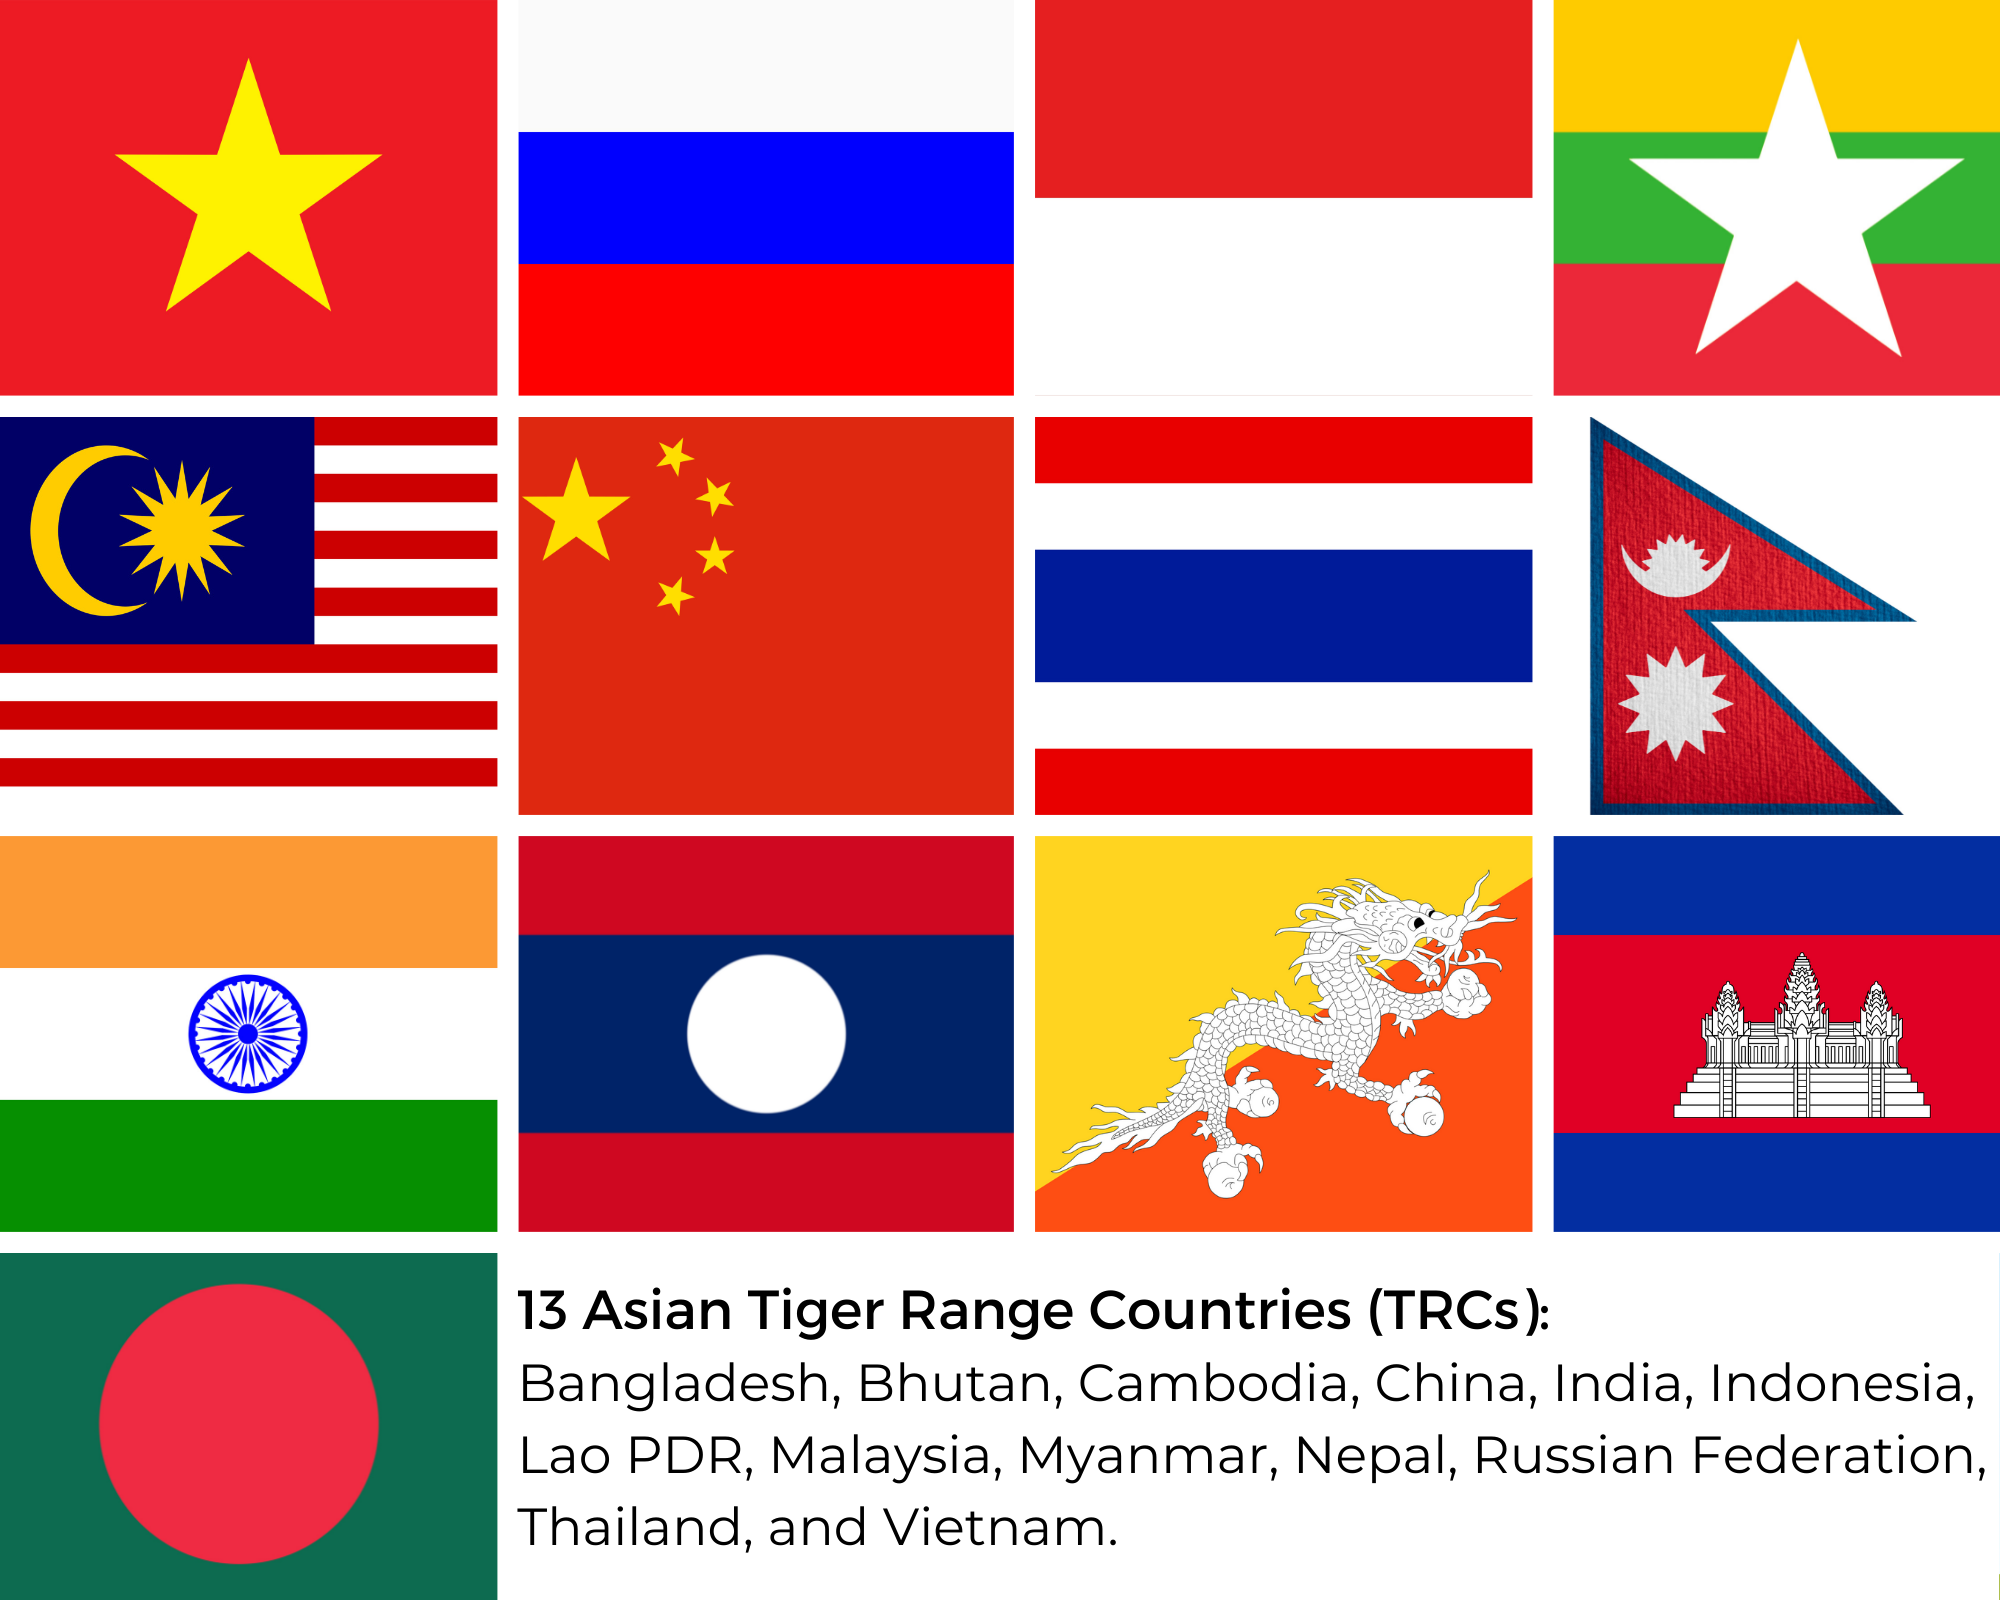 Welcoming The Lunar Year Of The Tiger 2022 - Join Svw To Protect  Indochinese Tigers - SVW - Save Vietnam's Wildlife